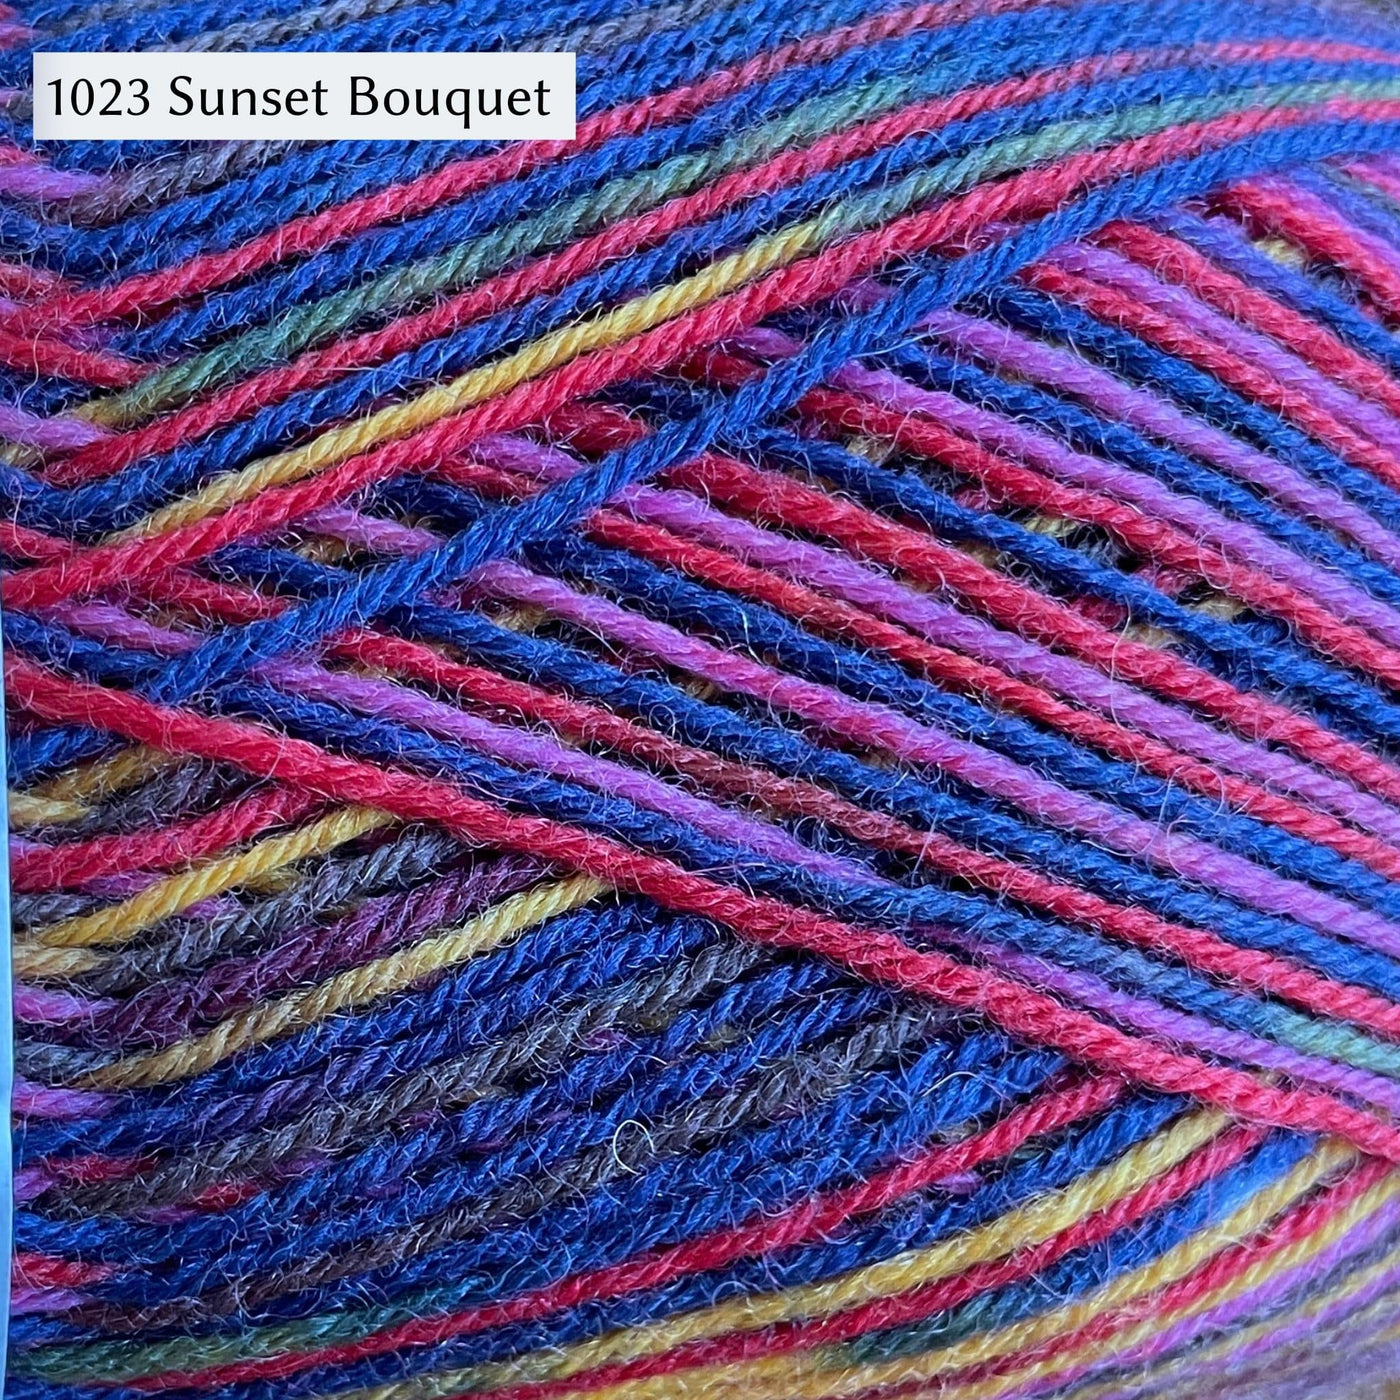 Signature 4 ply - West Yorkshire Spinners - Lili Comme Tout Fil